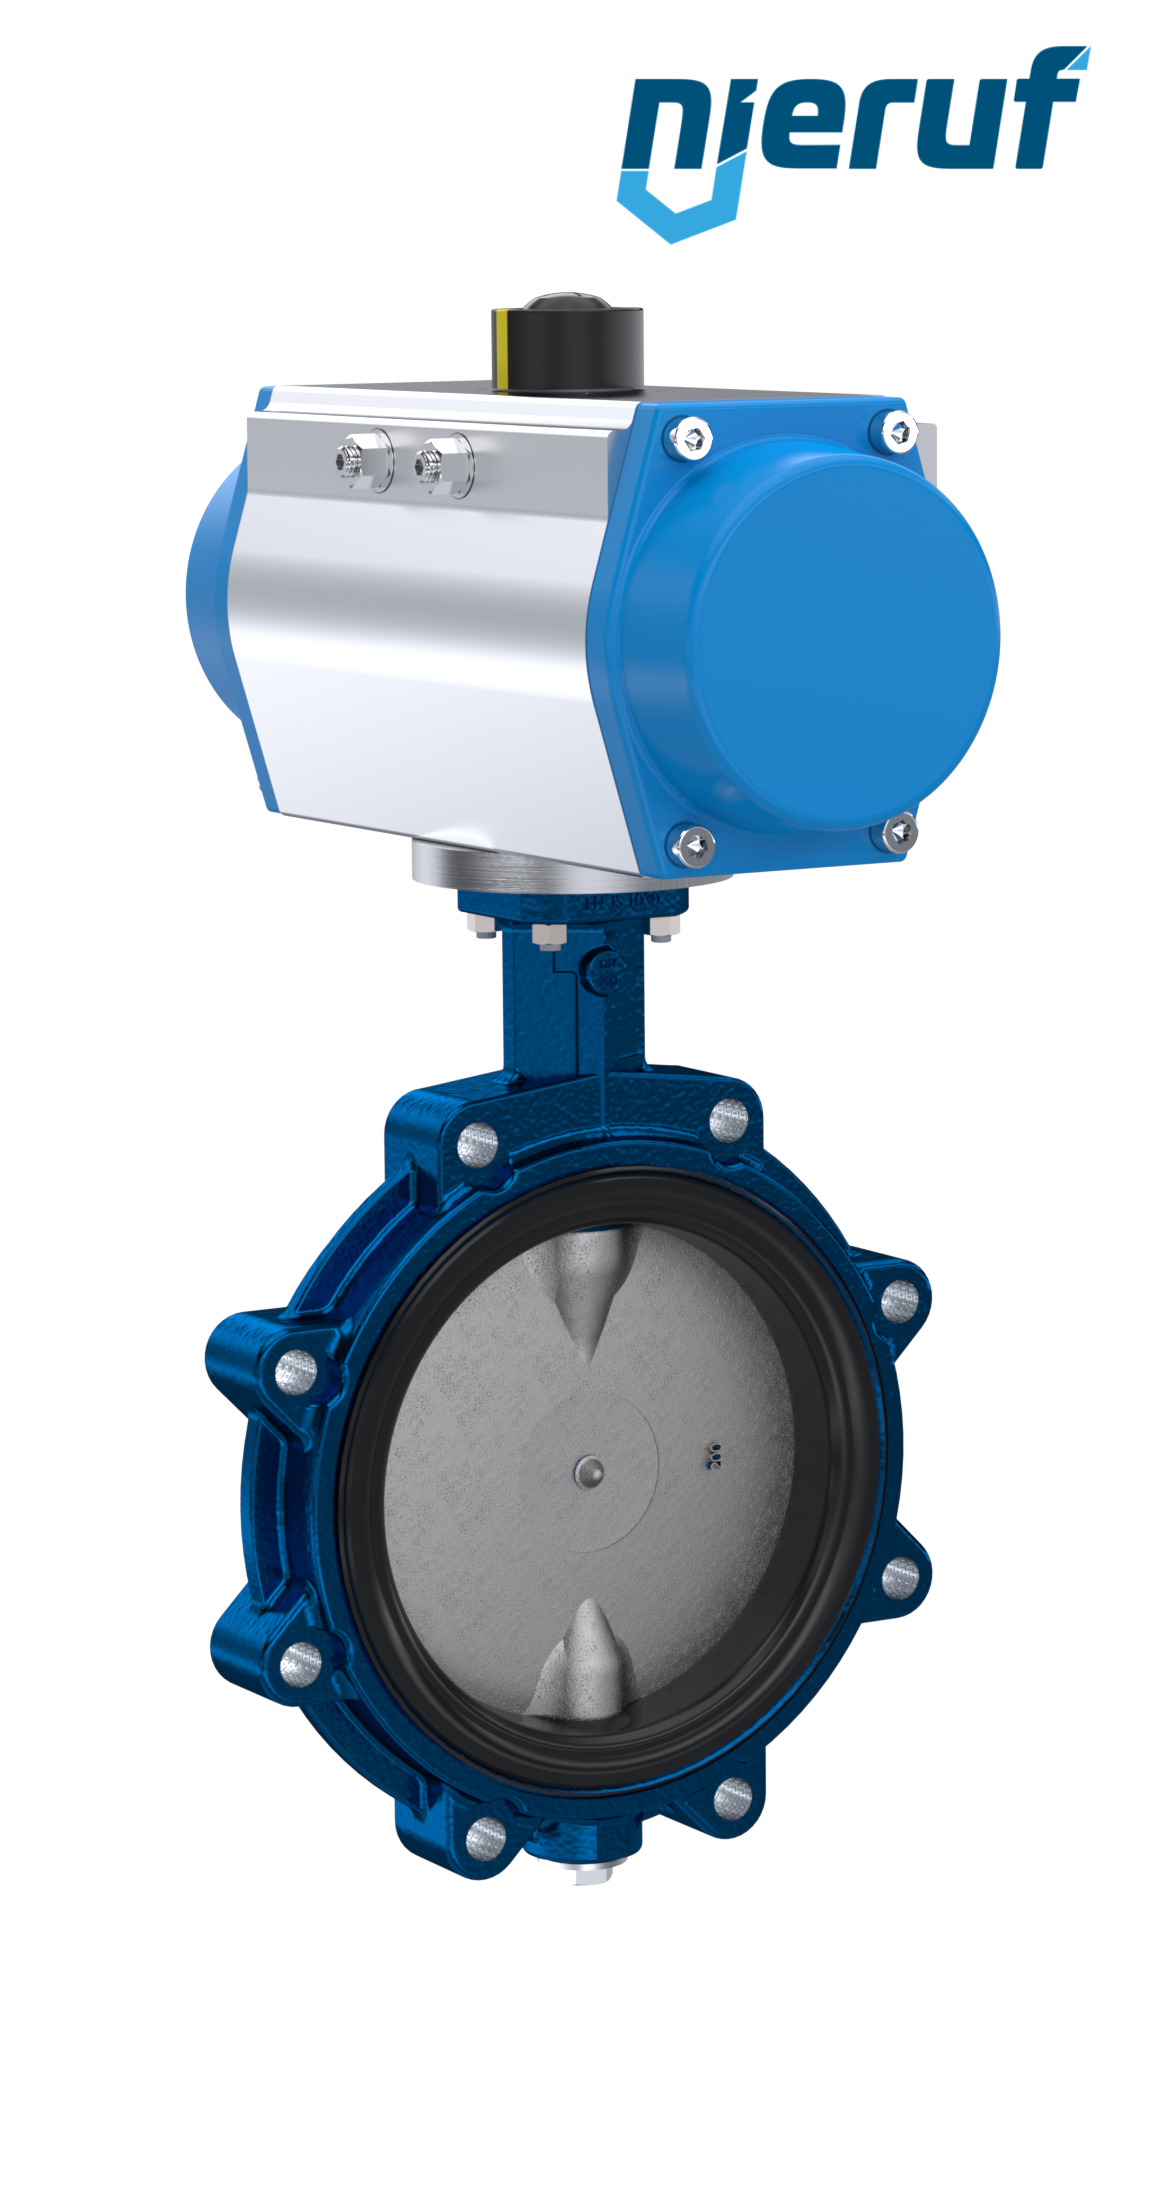 Butterfly valve DN 200 AK02 EPDM DVGW drinking water, WRAS, ACS, W270 pneumatic actuator single acting